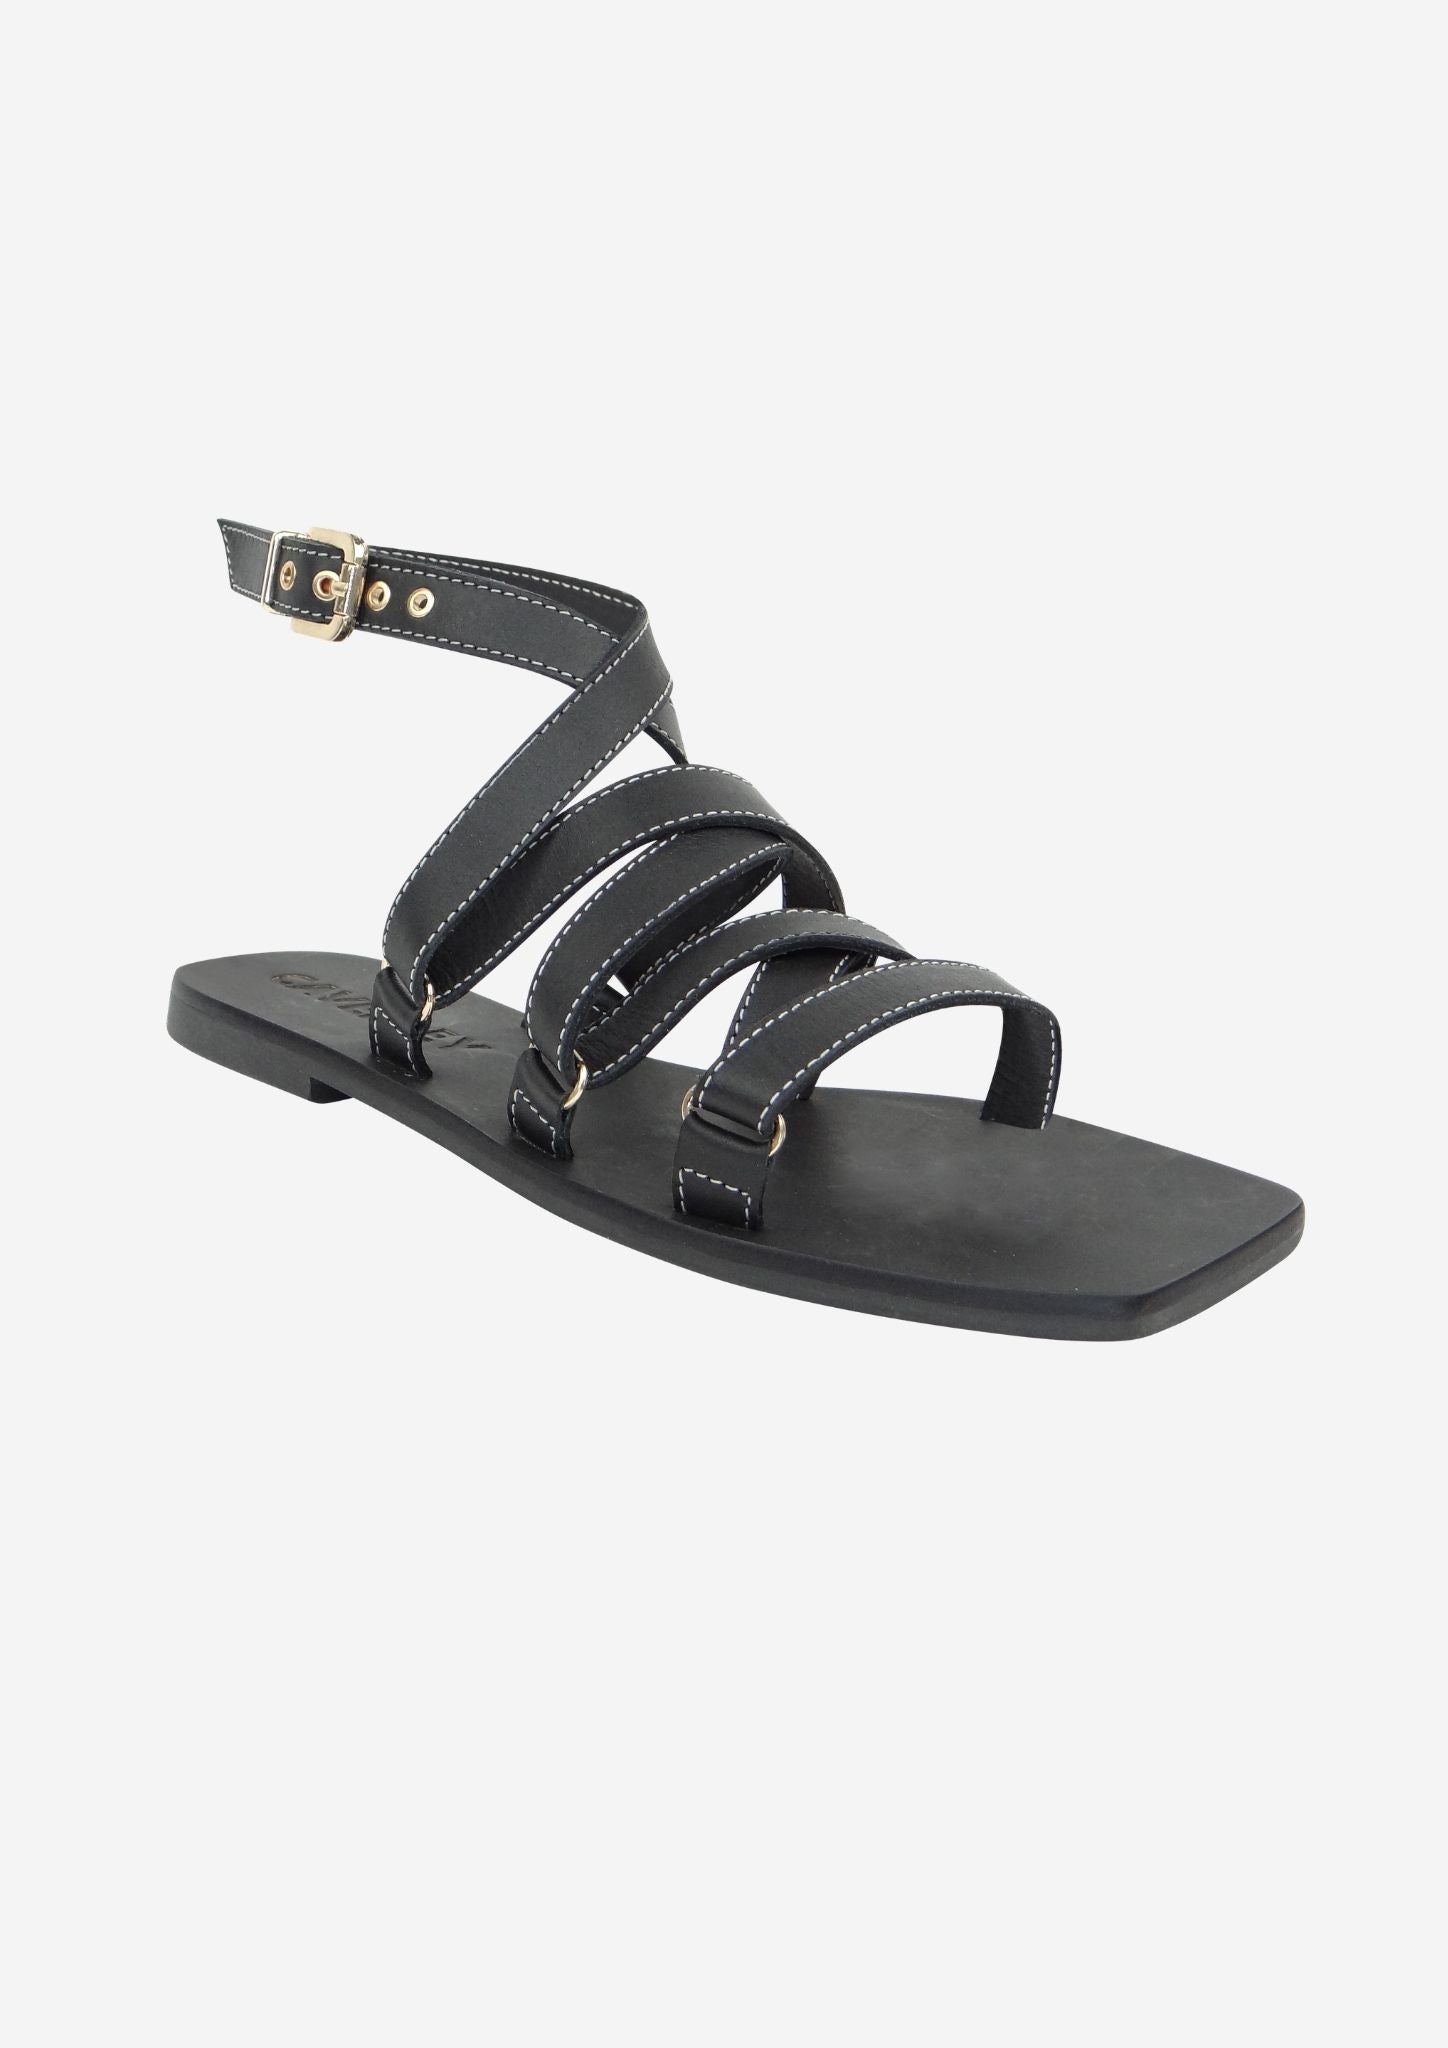 CAVERLEY Addie Slide in Black 21S105C Black FROM EIGHTYWINGOLD - OFFICIAL BRAND PARTNER